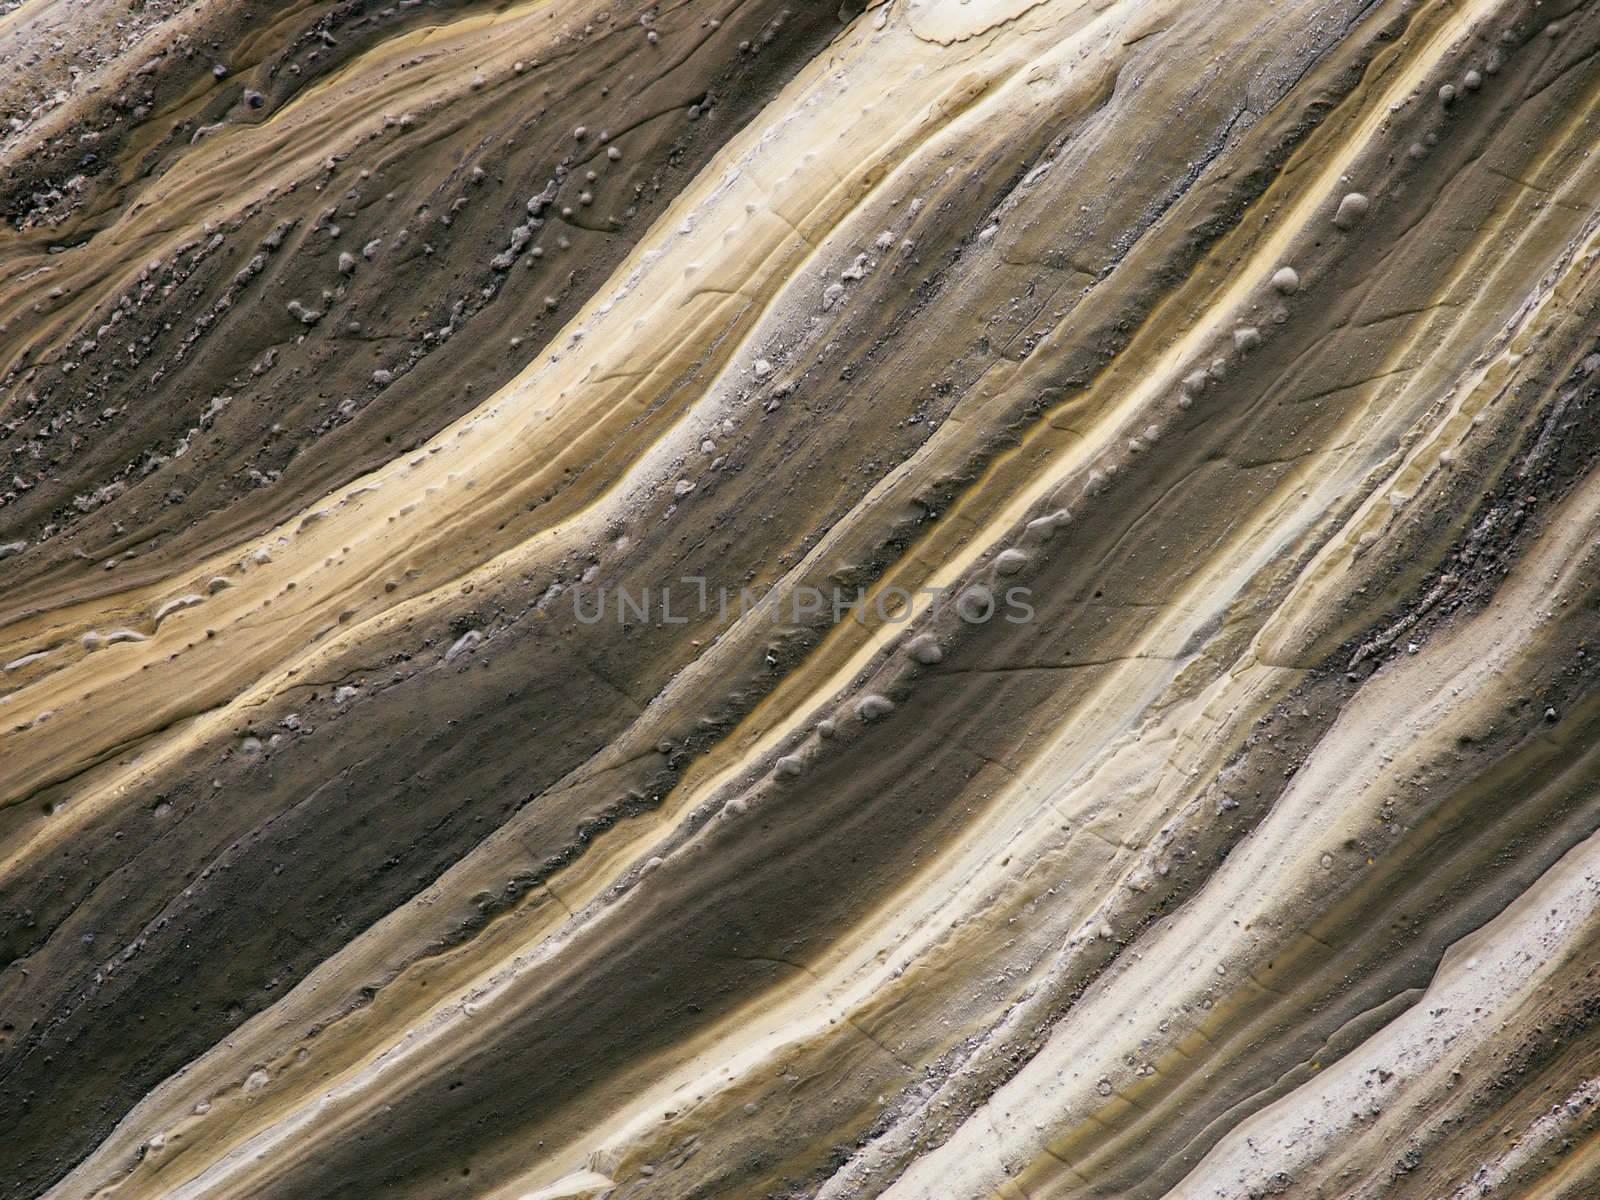 Background / textural image of a rock wall eroded by rain water.
